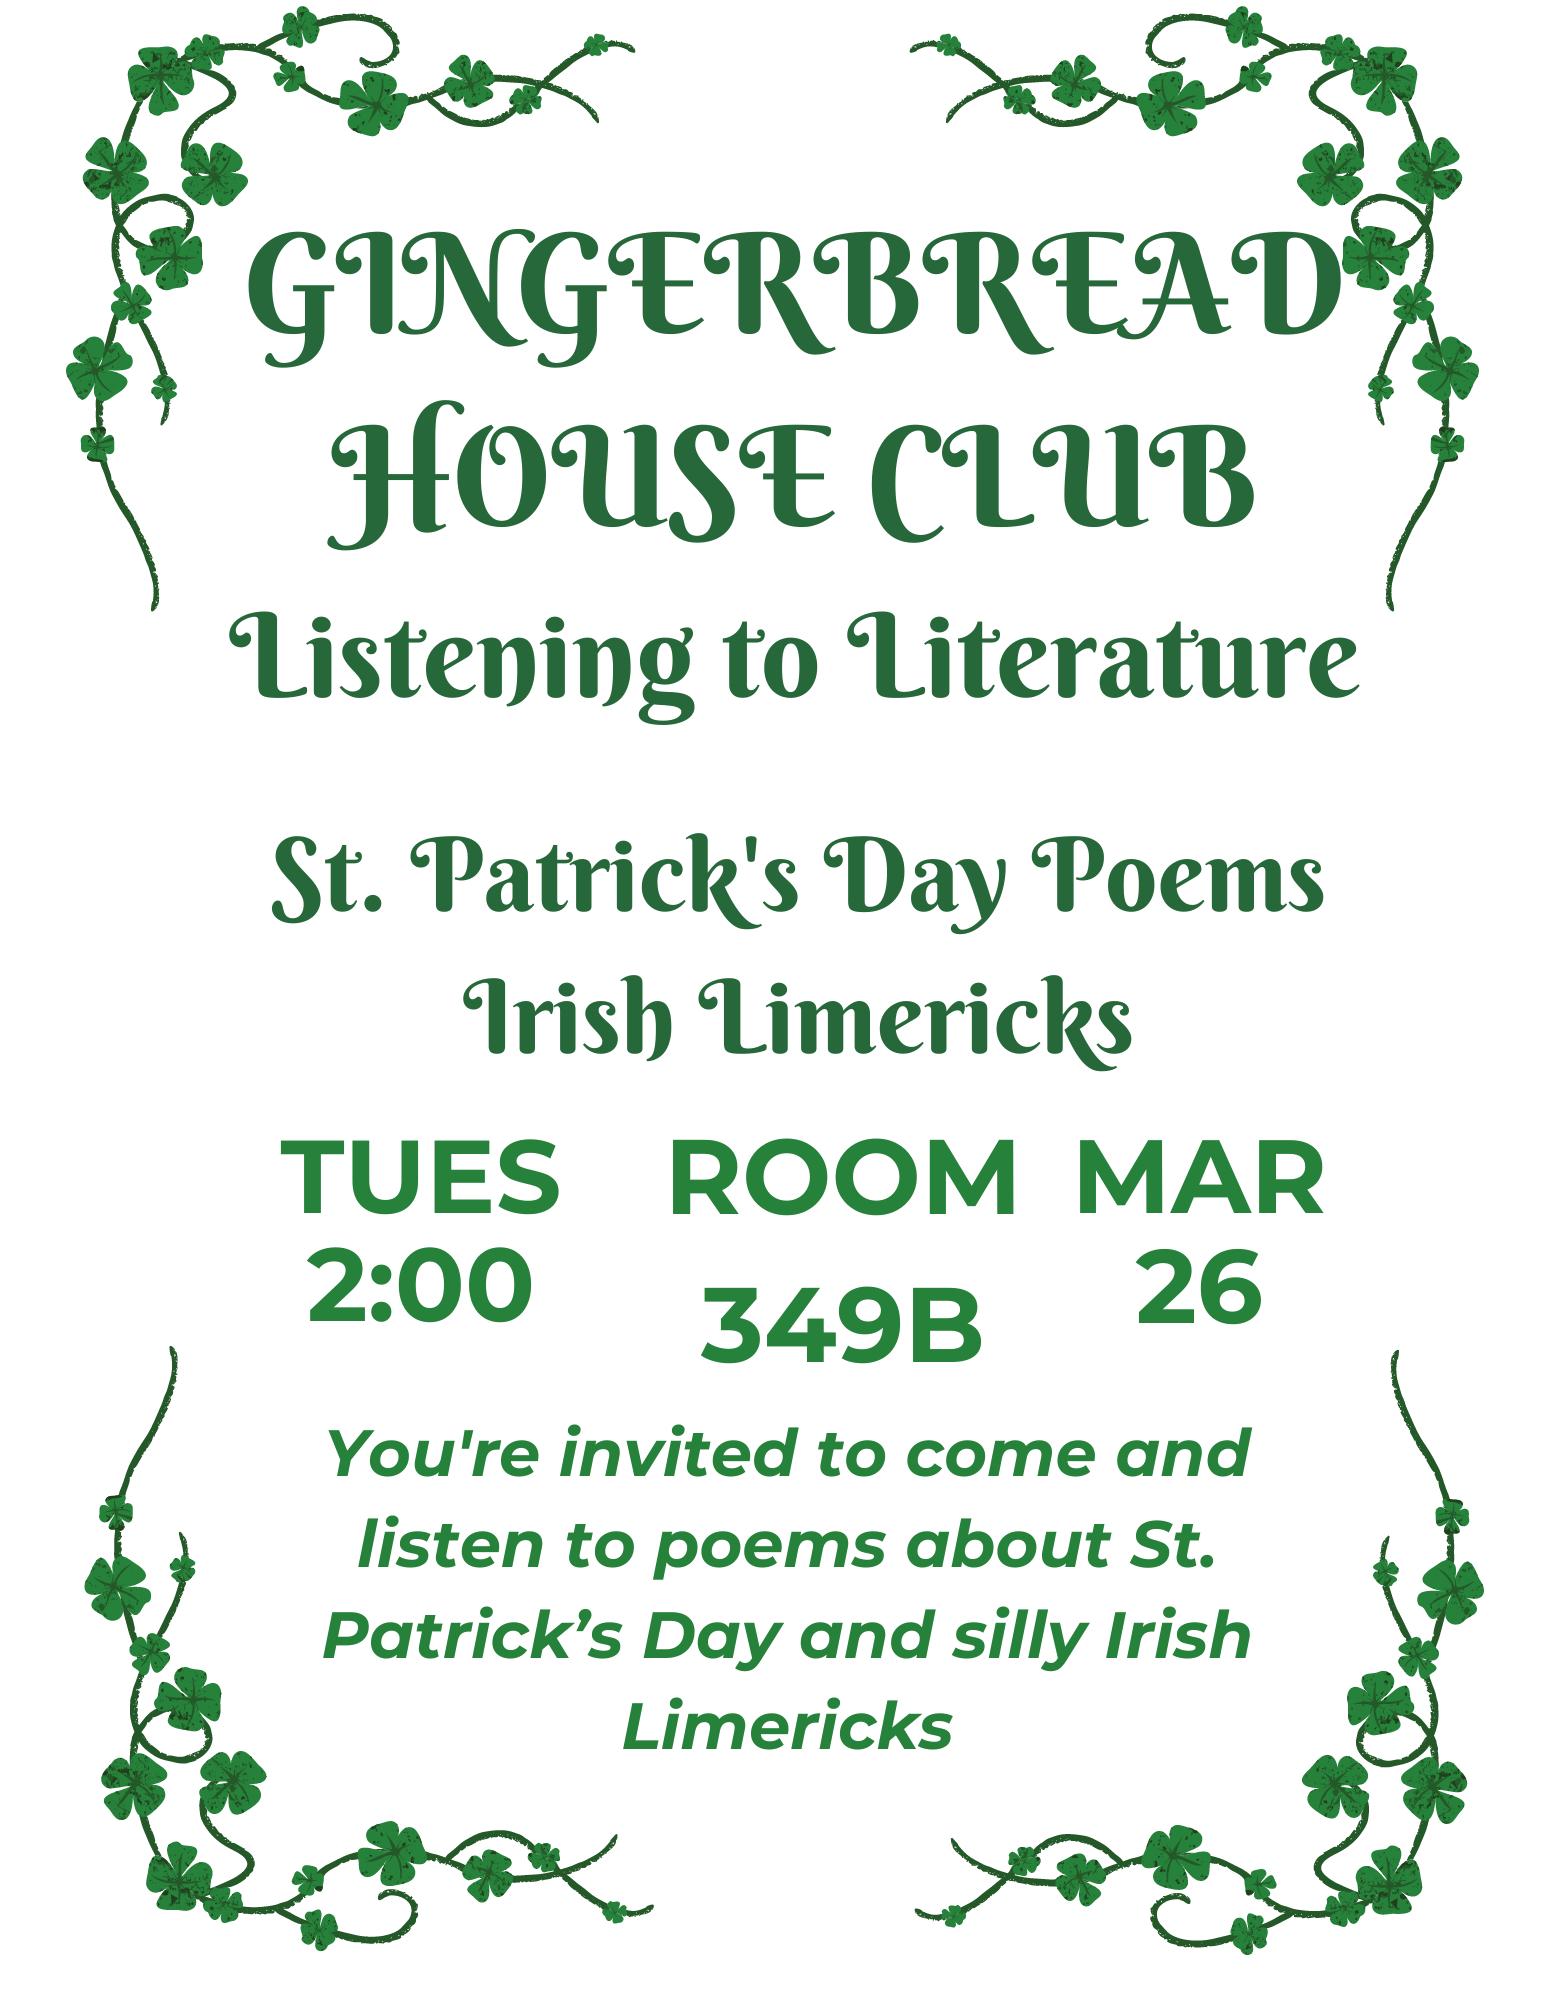 gingerbread house club plans for all-things Irish at March meeting